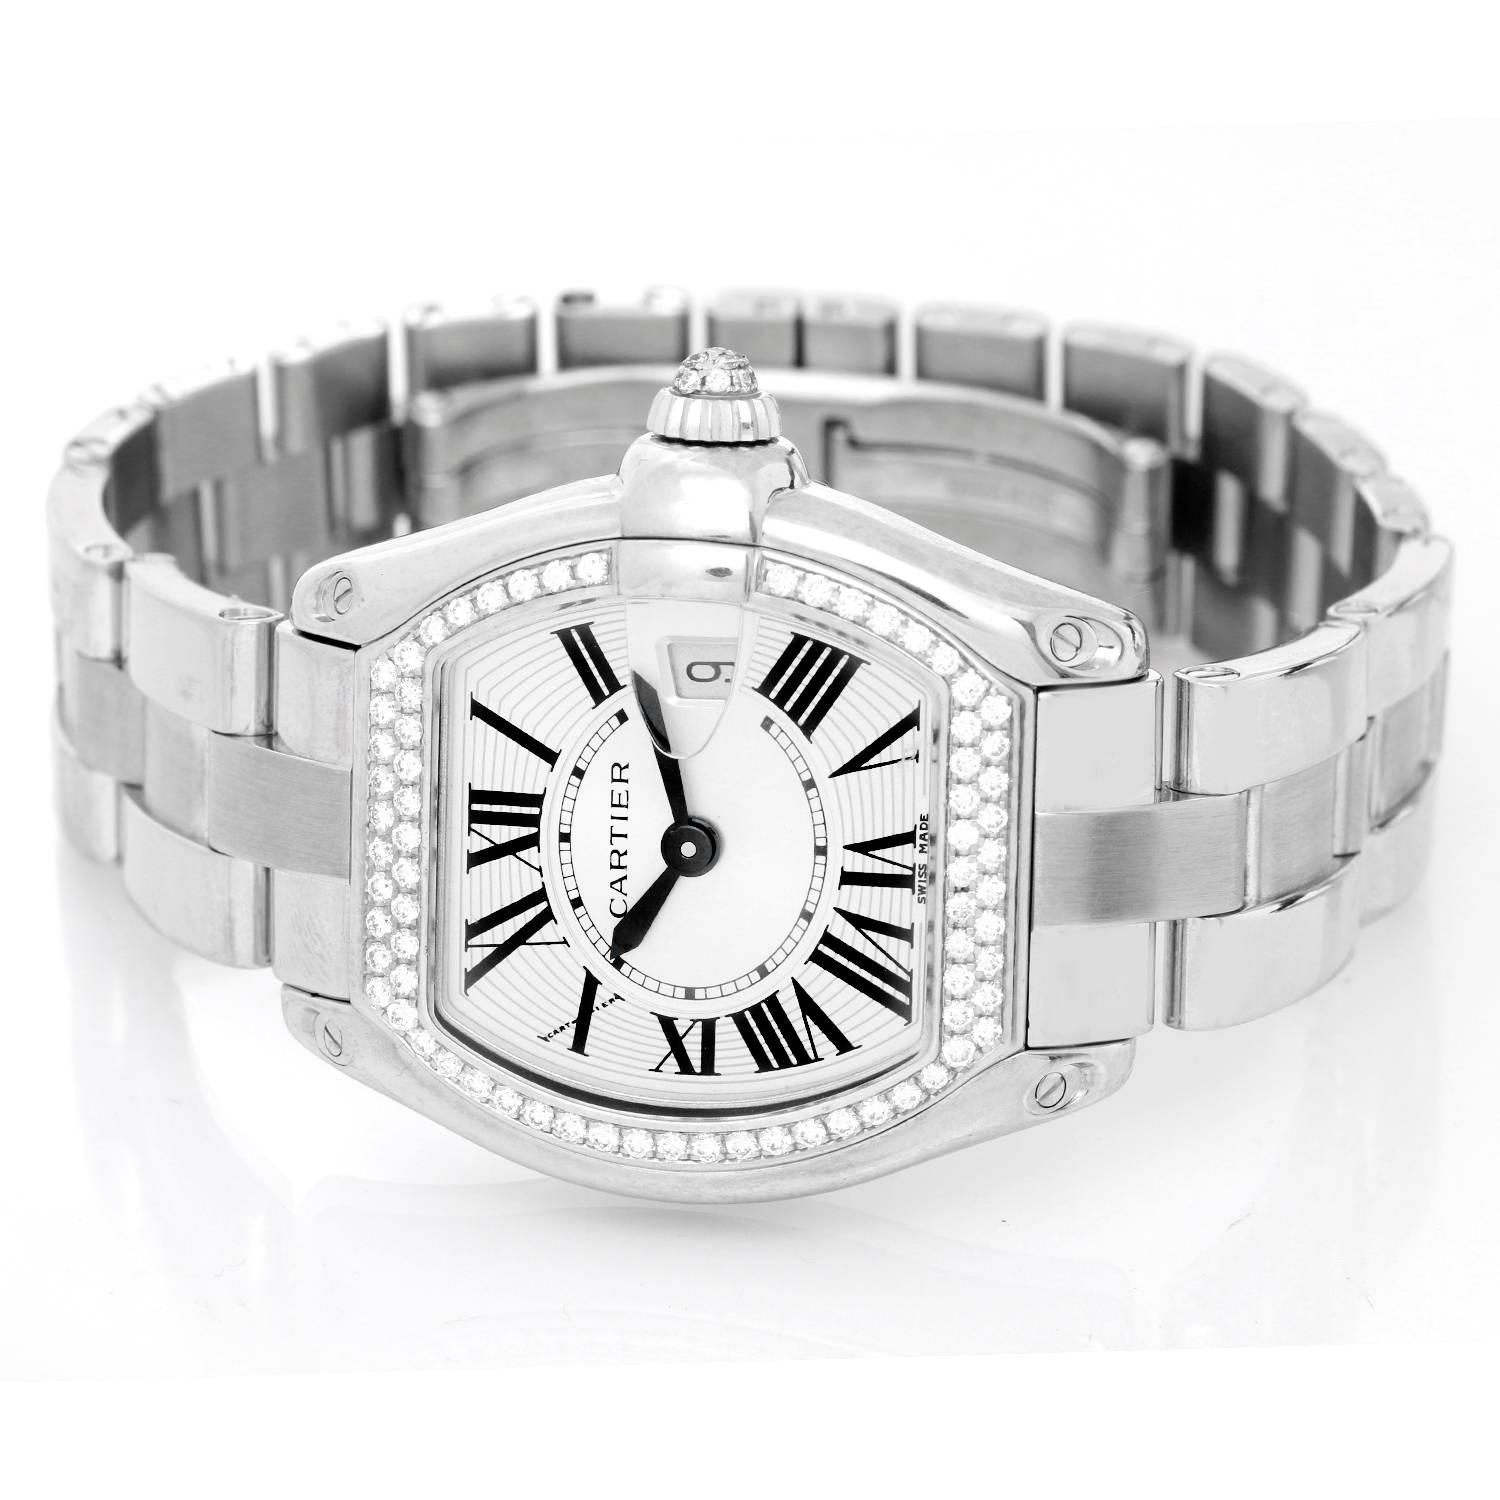 Cartier Roadster Ladies 18K White Gold Diamond Watch WE5002X2 -  Quartz. 18K White Gold Cartier Diamond bezel and Diamond cabochon setting on crown ( 30 x 35 mm). Silvered Guilloche dial with black Roman numerals. 18K White Gold Cartier bracelet